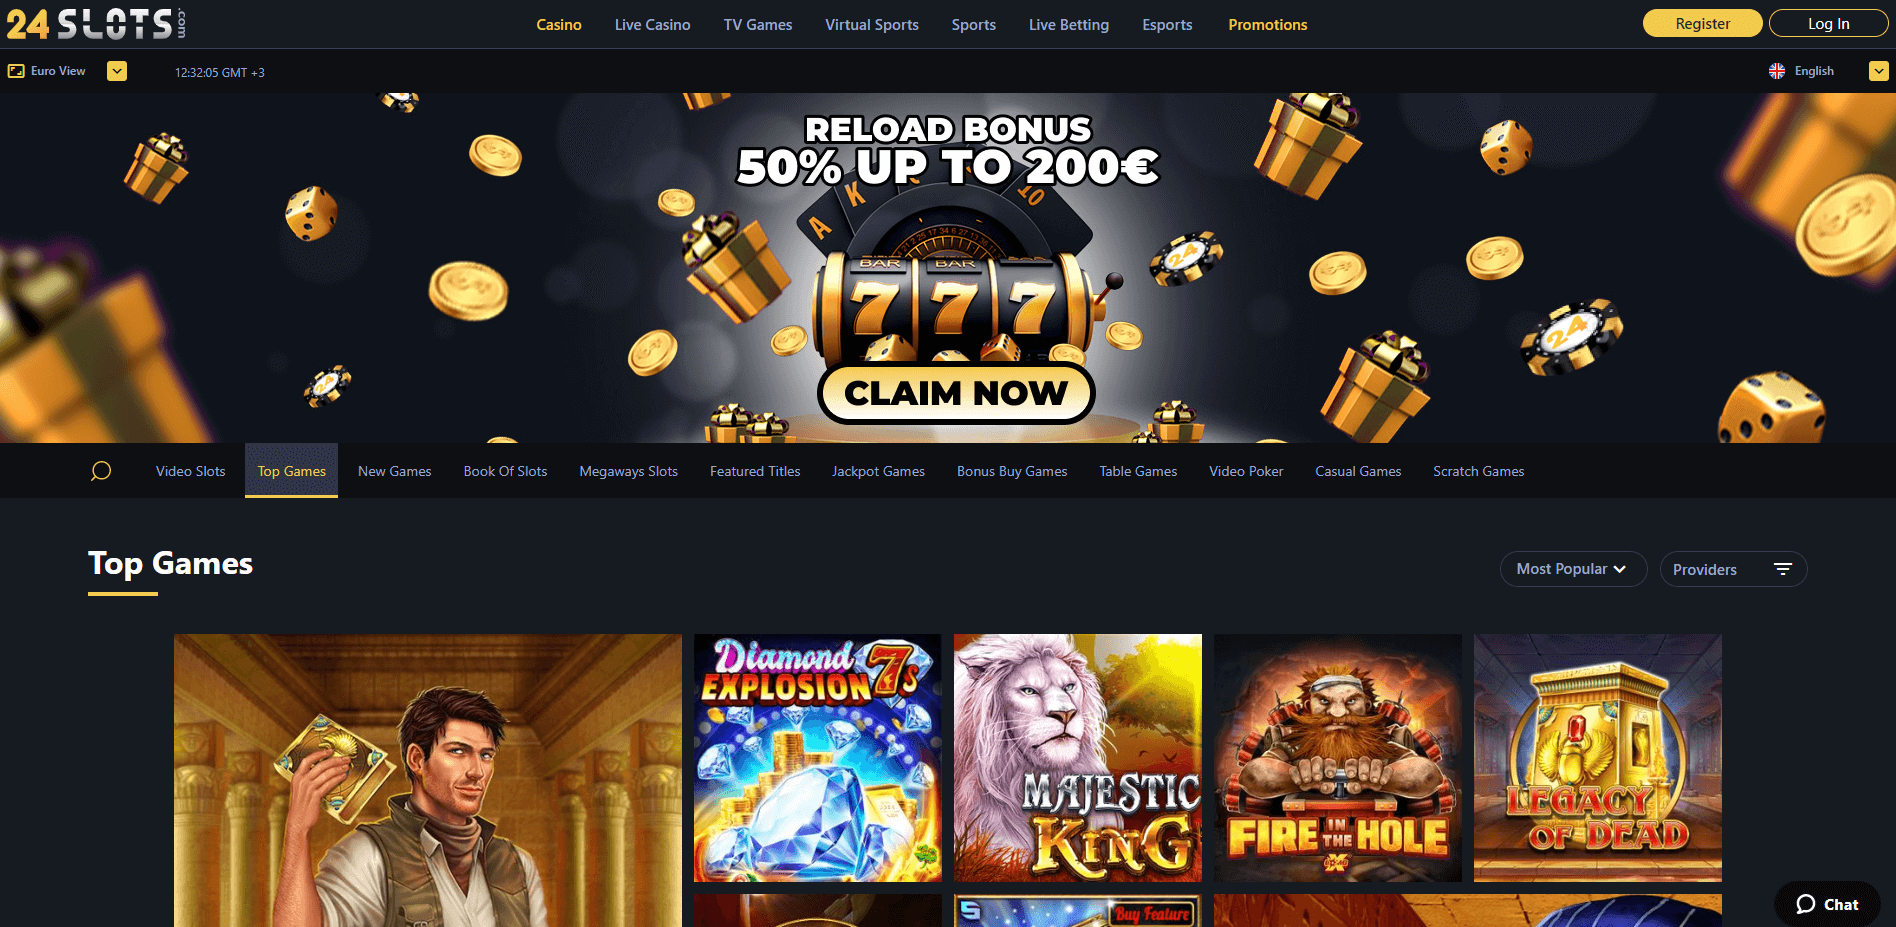 24slots casino home page